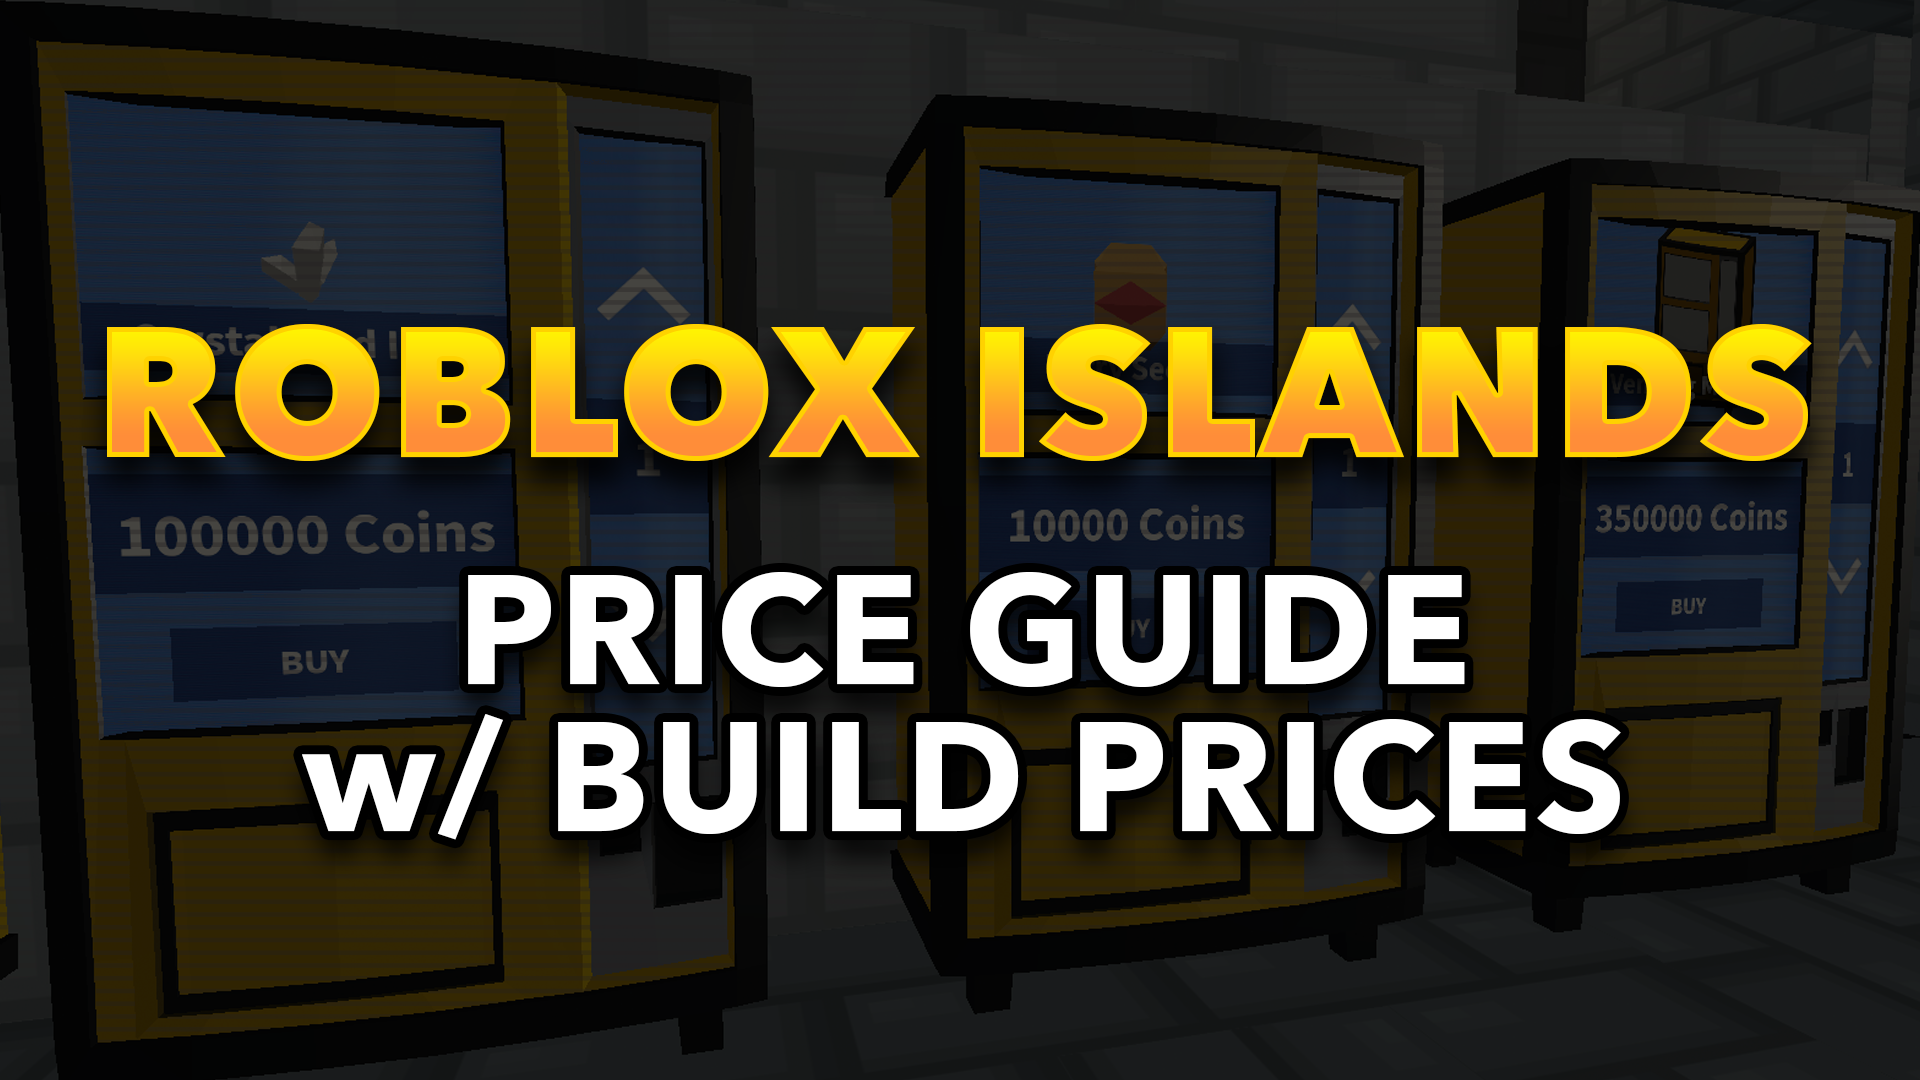 Roblox Islands Price Guide Deez Minifigs - robux 500 300p